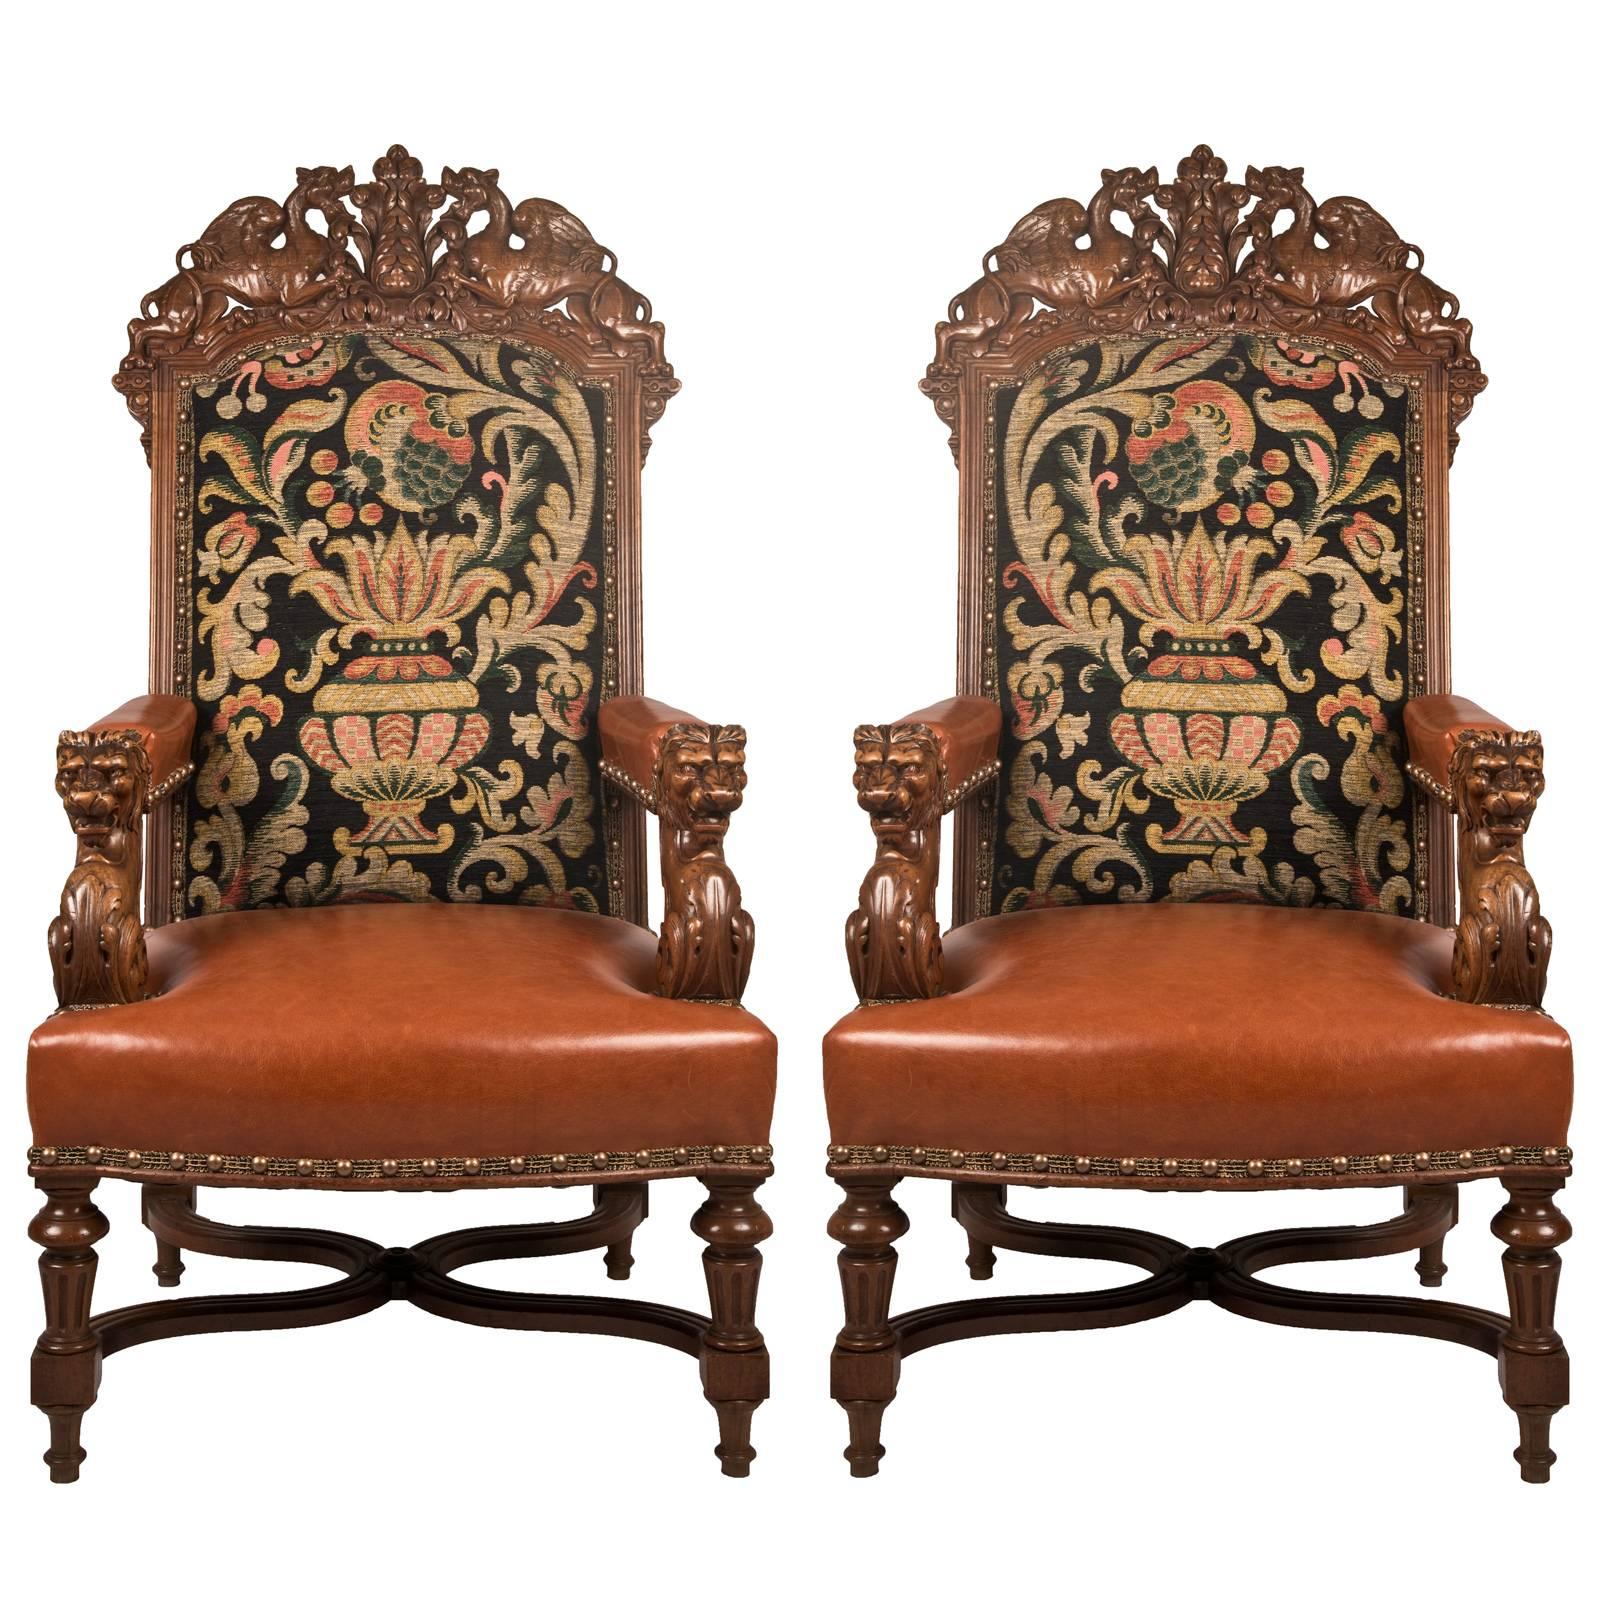 Pair of 19th Century Louis XIV Style Fauteuil Walnut Chairs